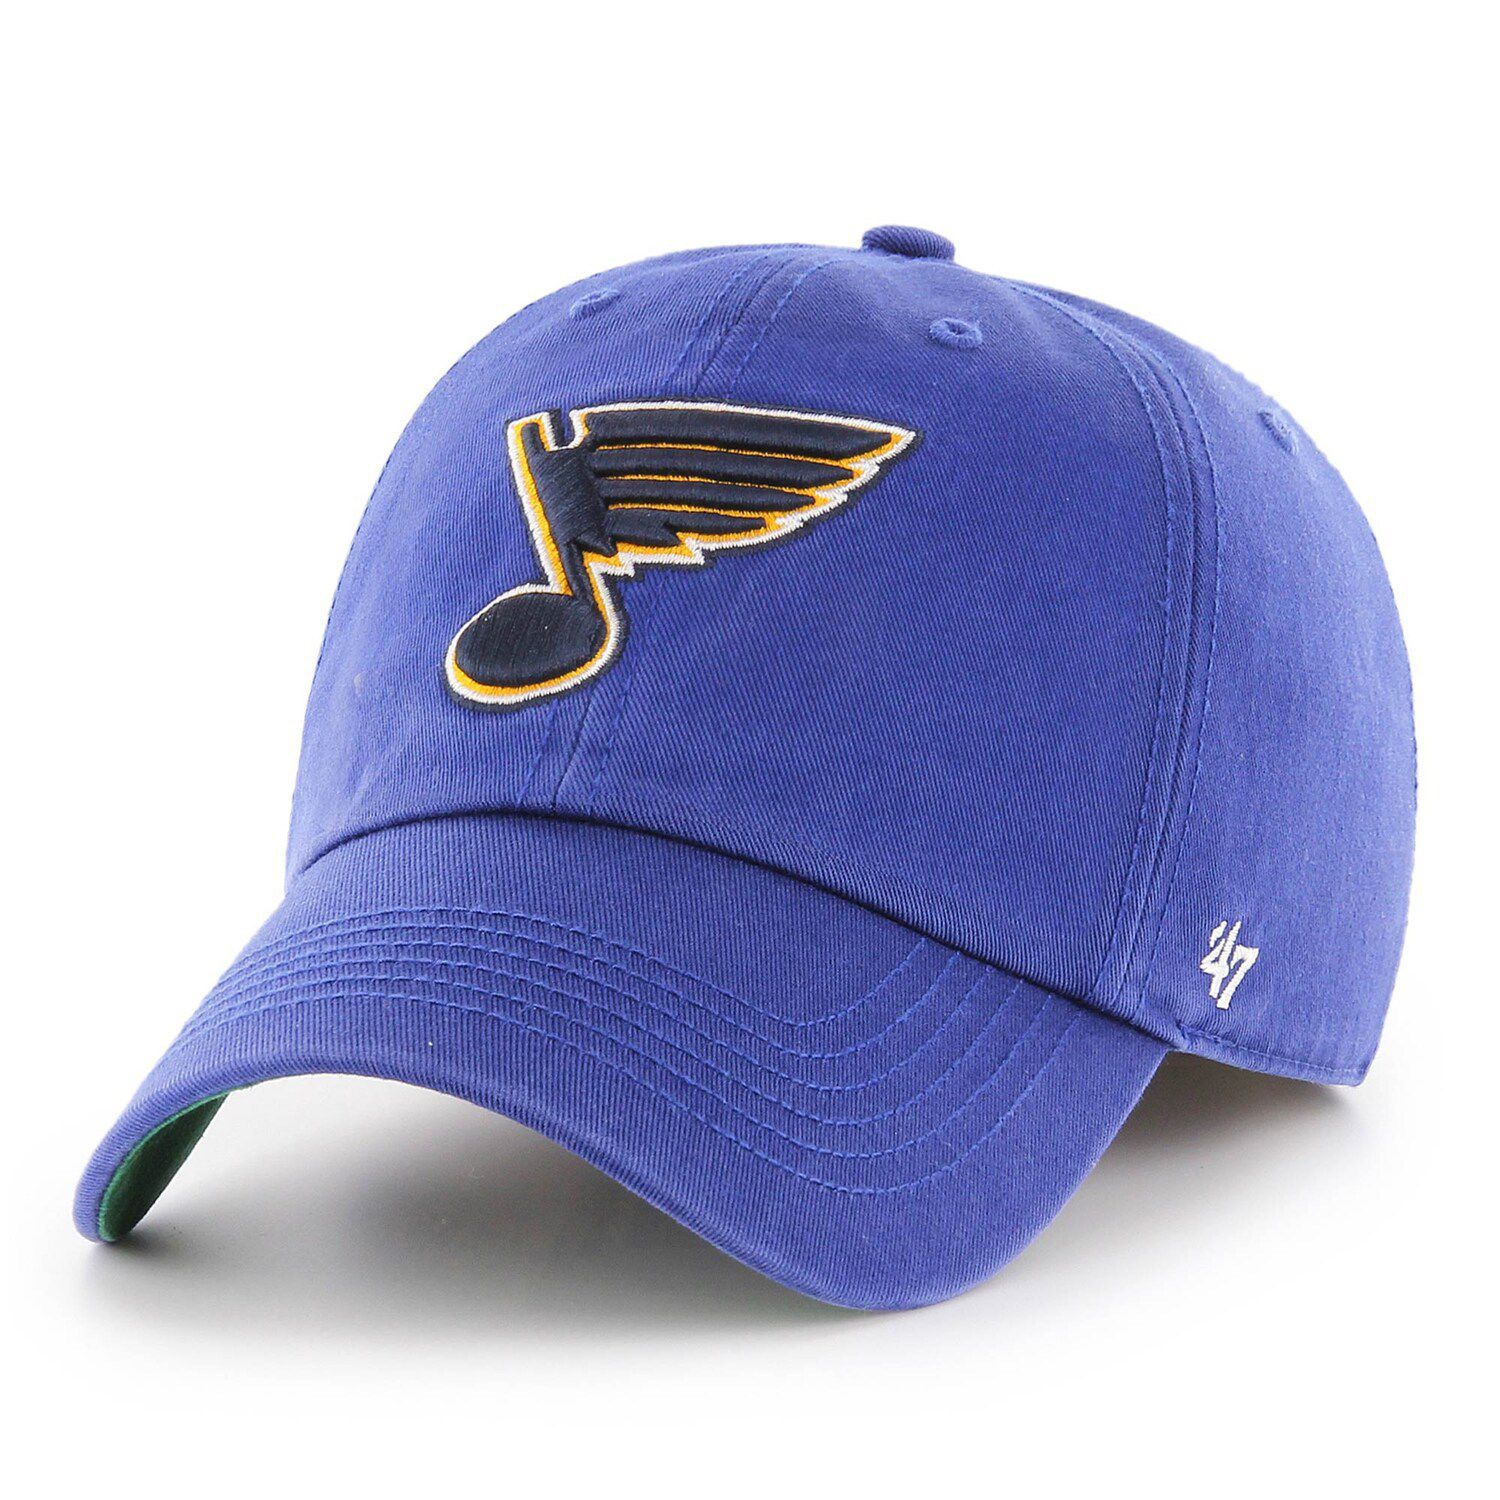 St. Louis Blues Youth Collegiate Arch Slouch Adjustable Hat - Blue